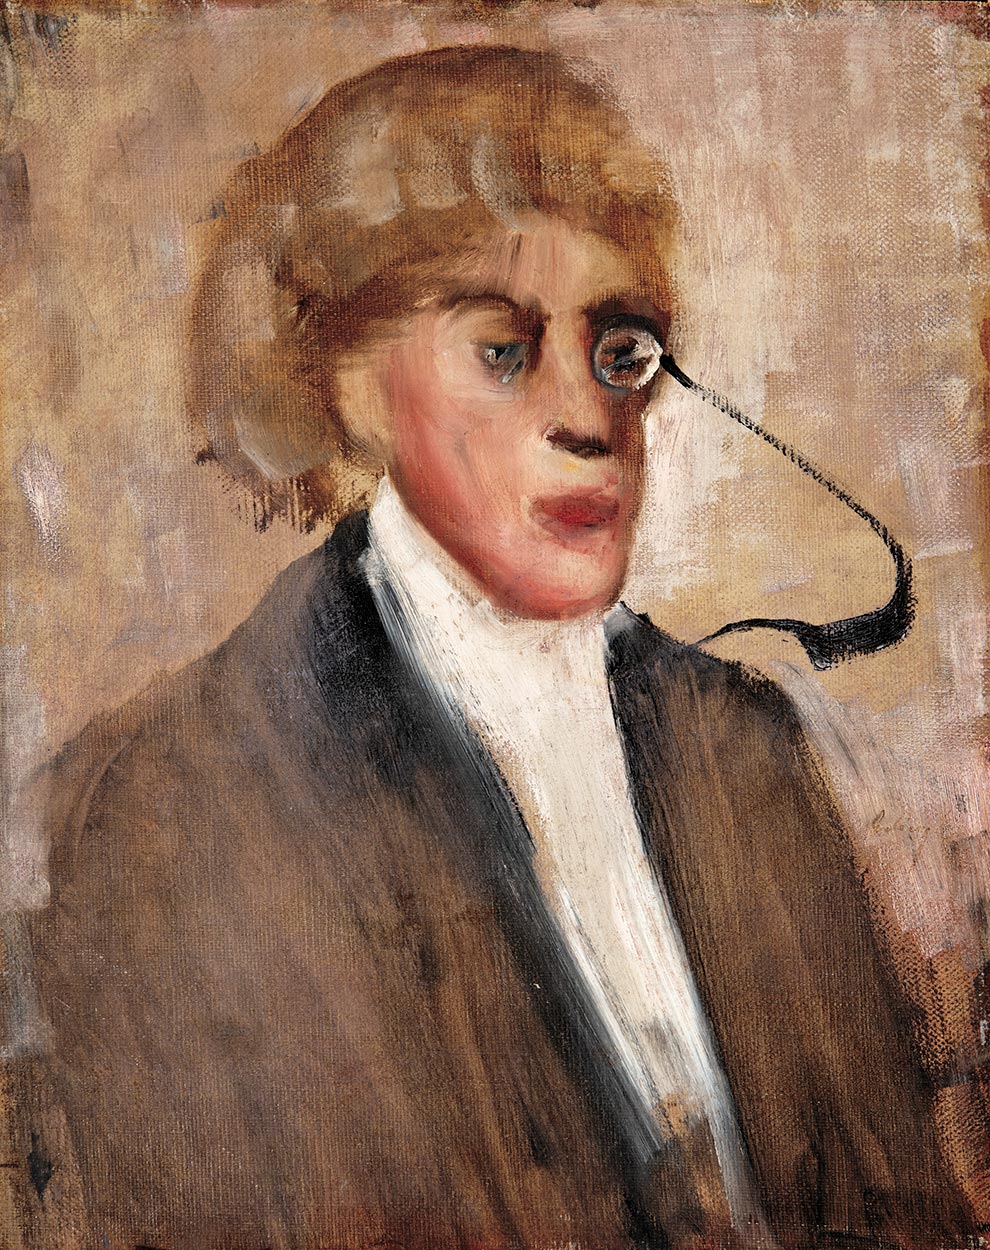 Gulácsy Lajos (1882-1932) Portrait of a Man with Monocle